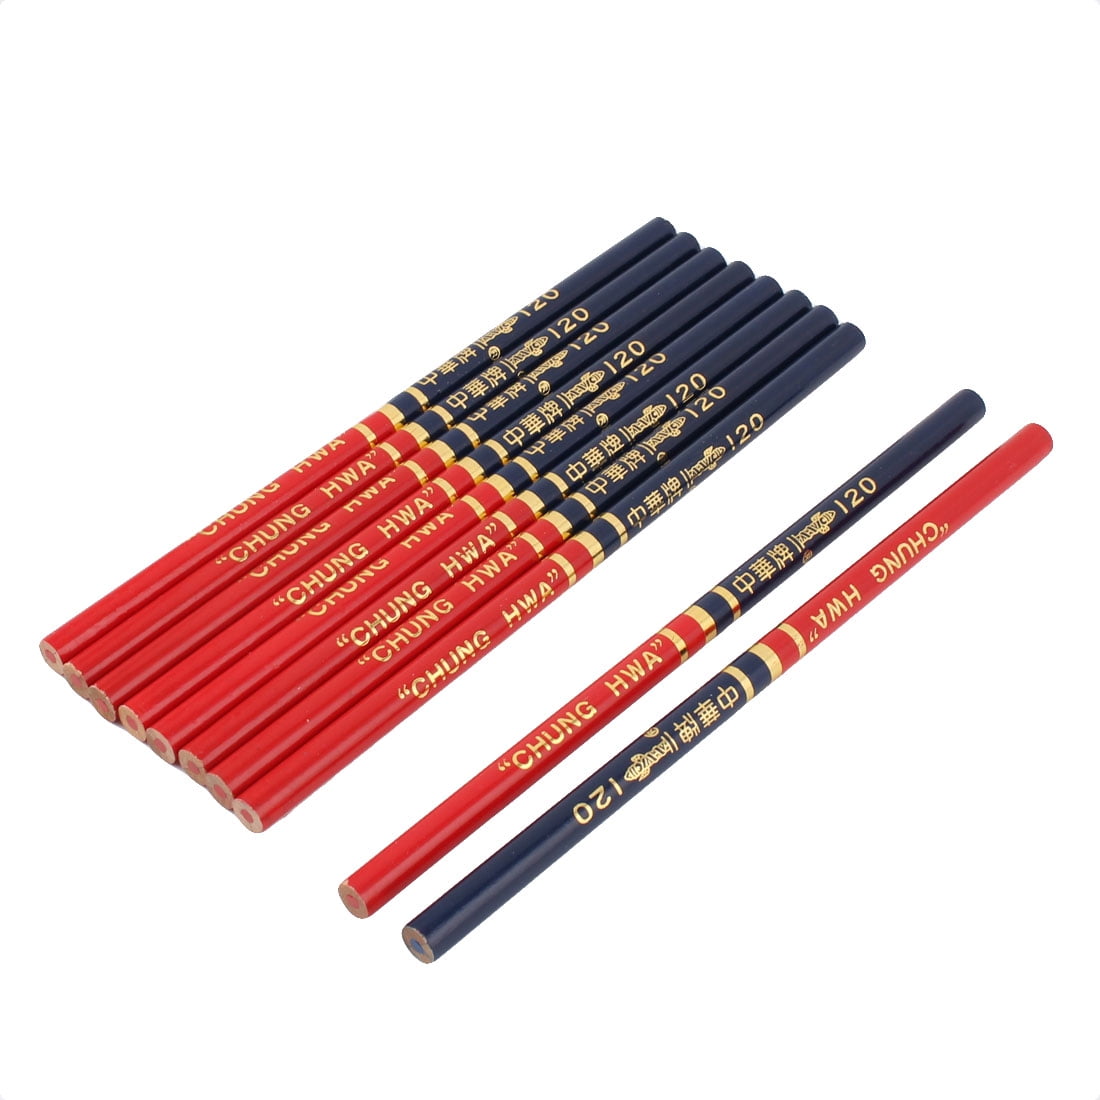 6 PK X 2 LOT OF 12 PENCILS AMERICAN SCHOLAR RED CHECKING PENCILS WITH ERASER 26538373027 